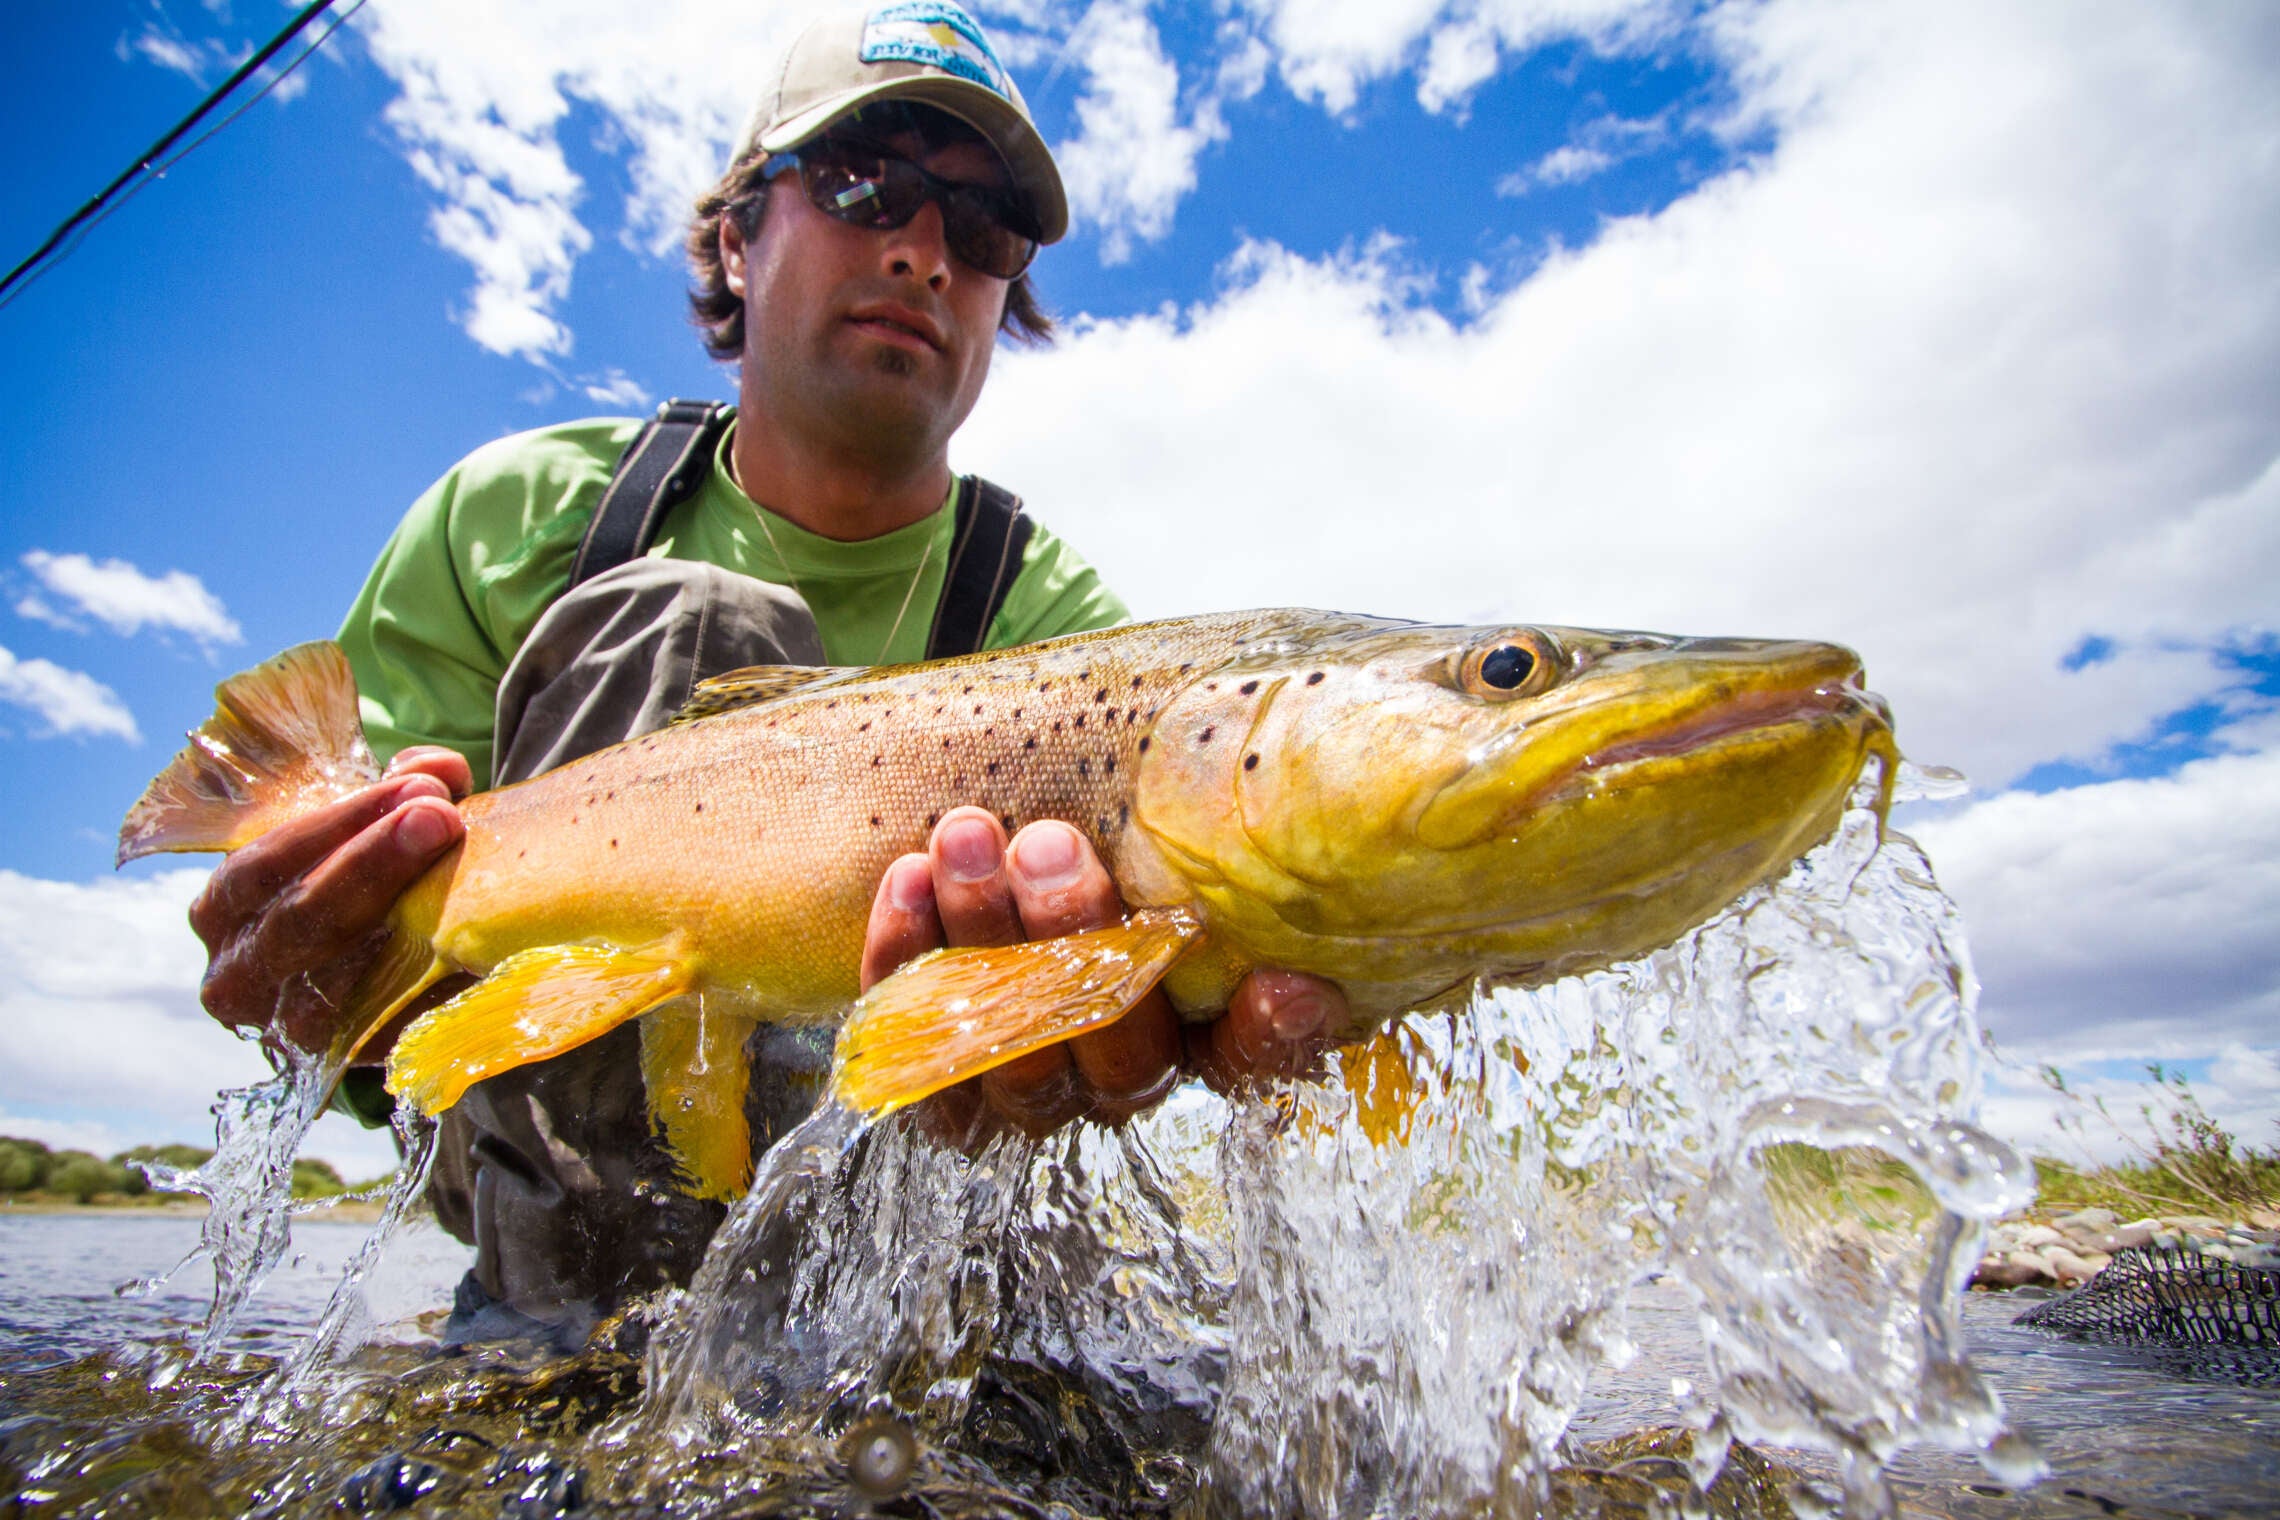 Argentina Fly Fishing Travel – Tailwaters Fly Fishing